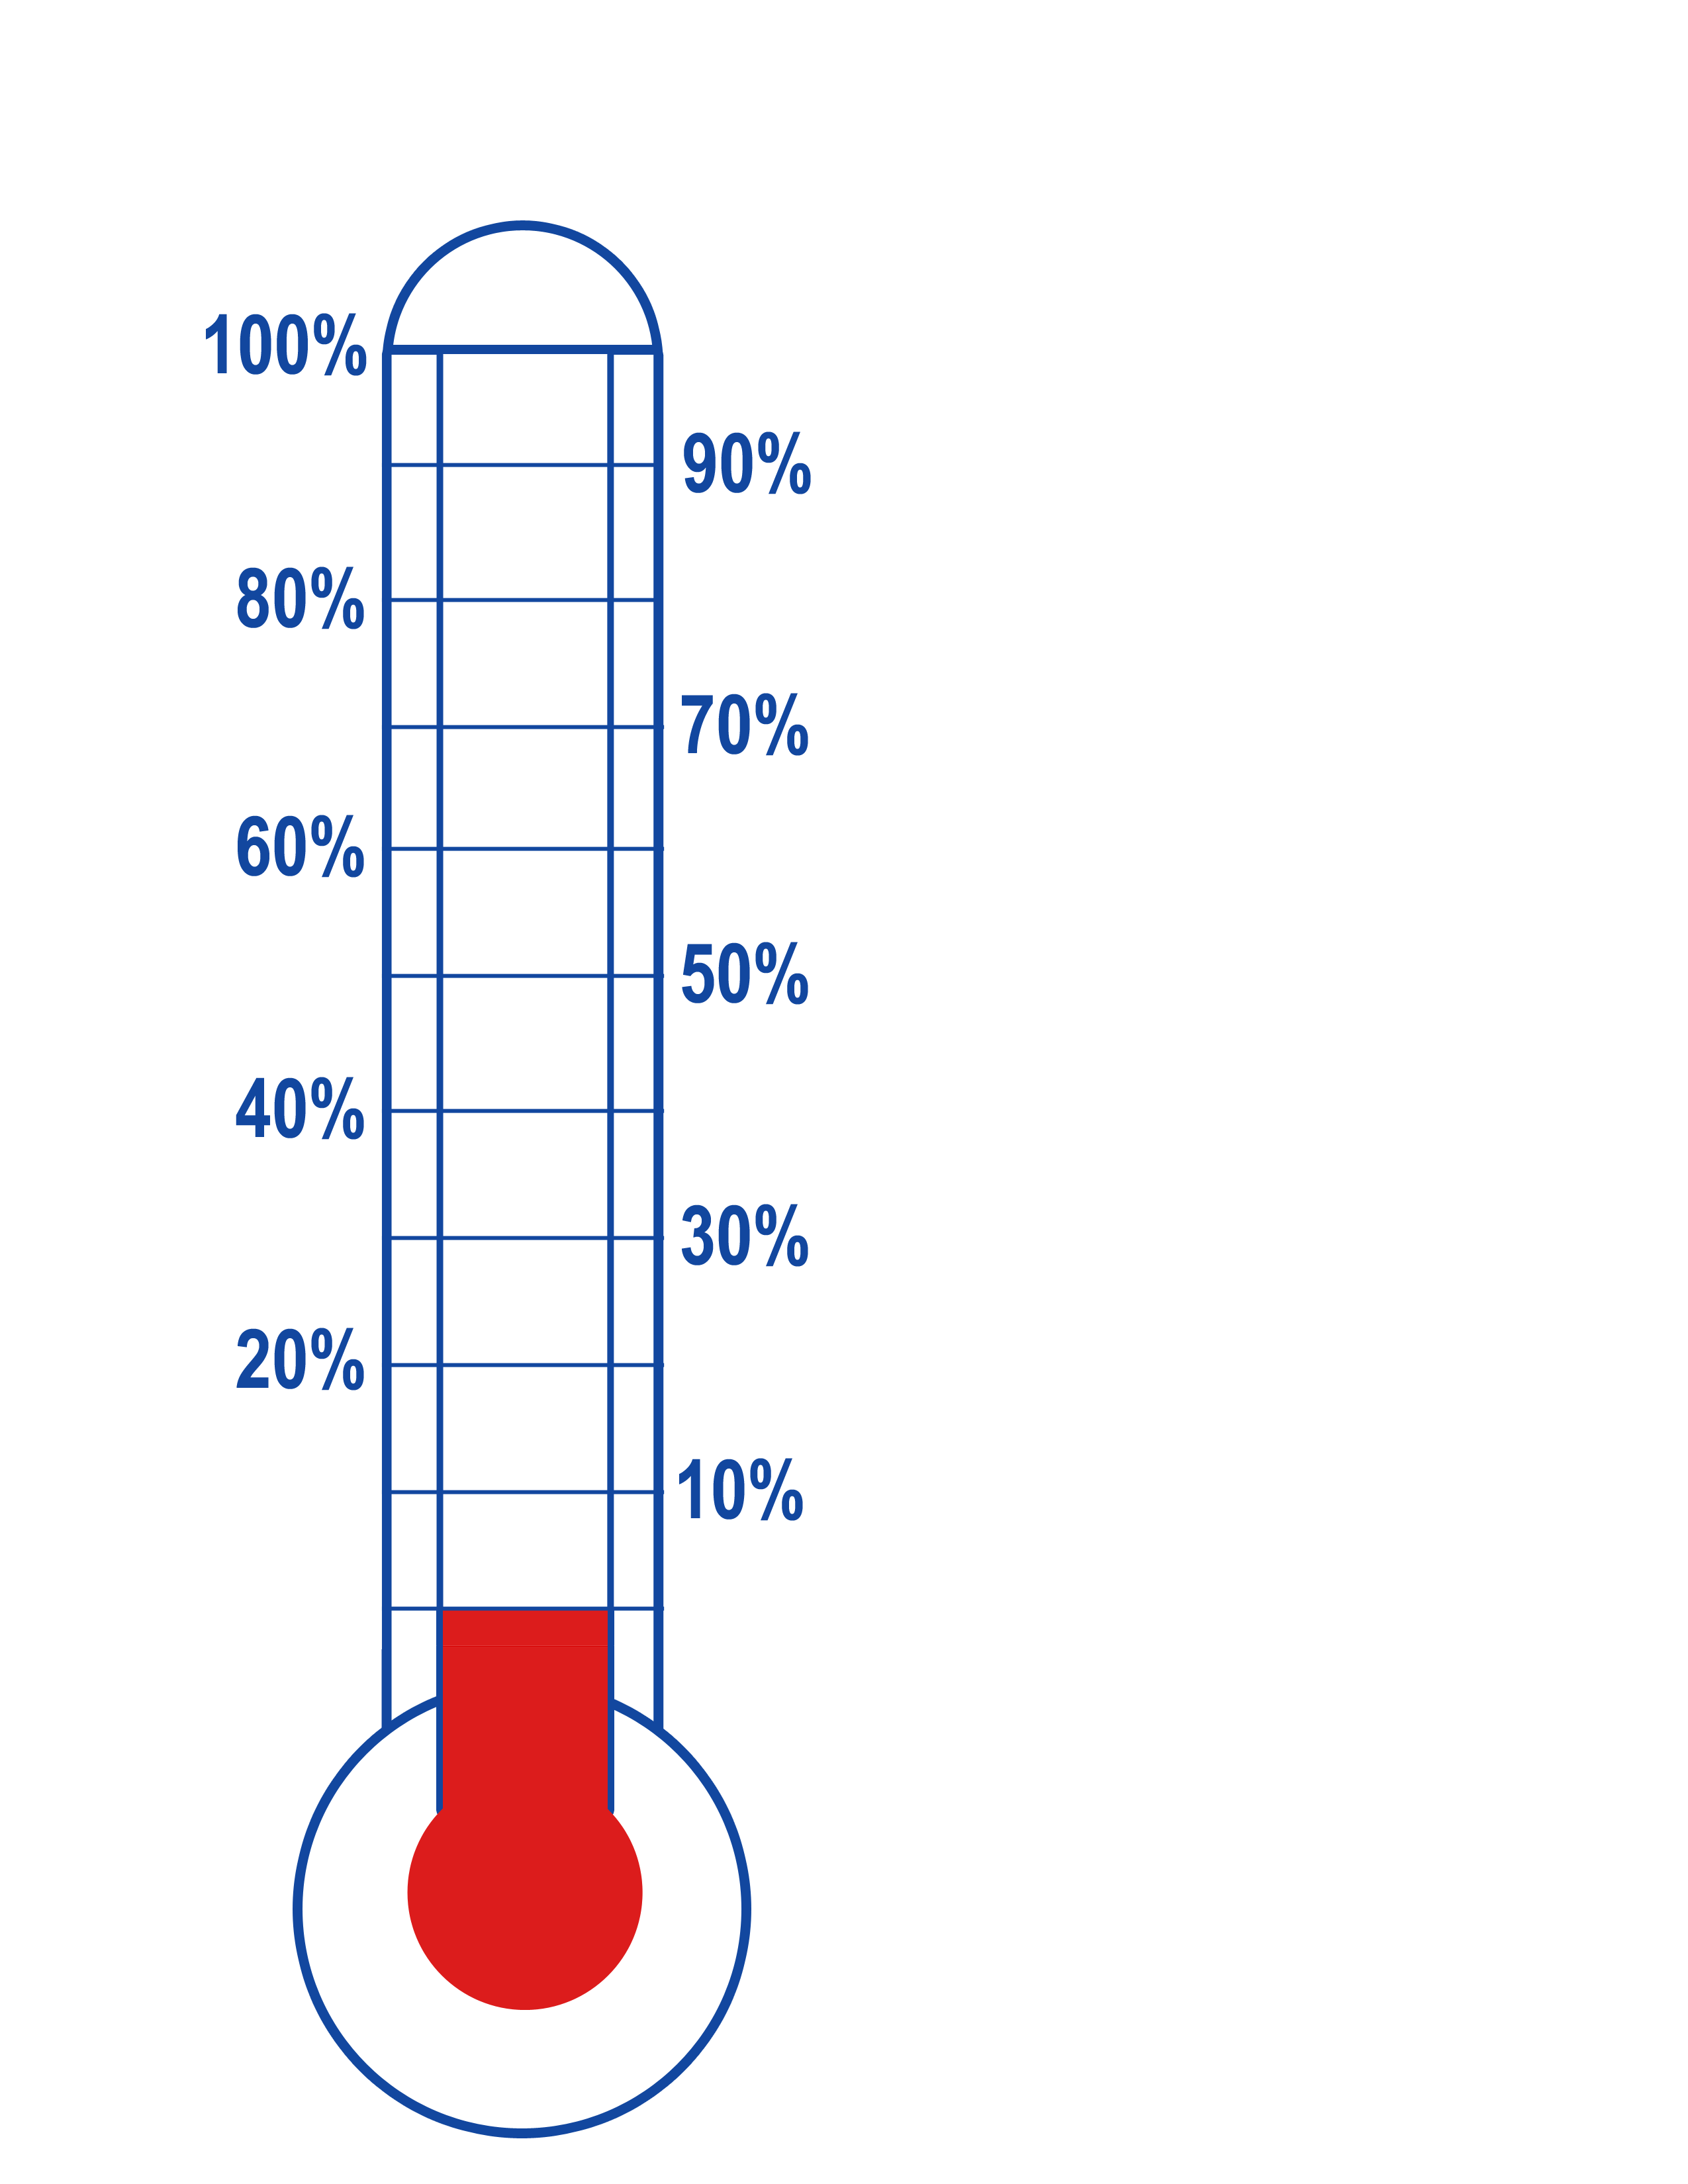 Printable fundraising thermometer clipart - Cliparting.com